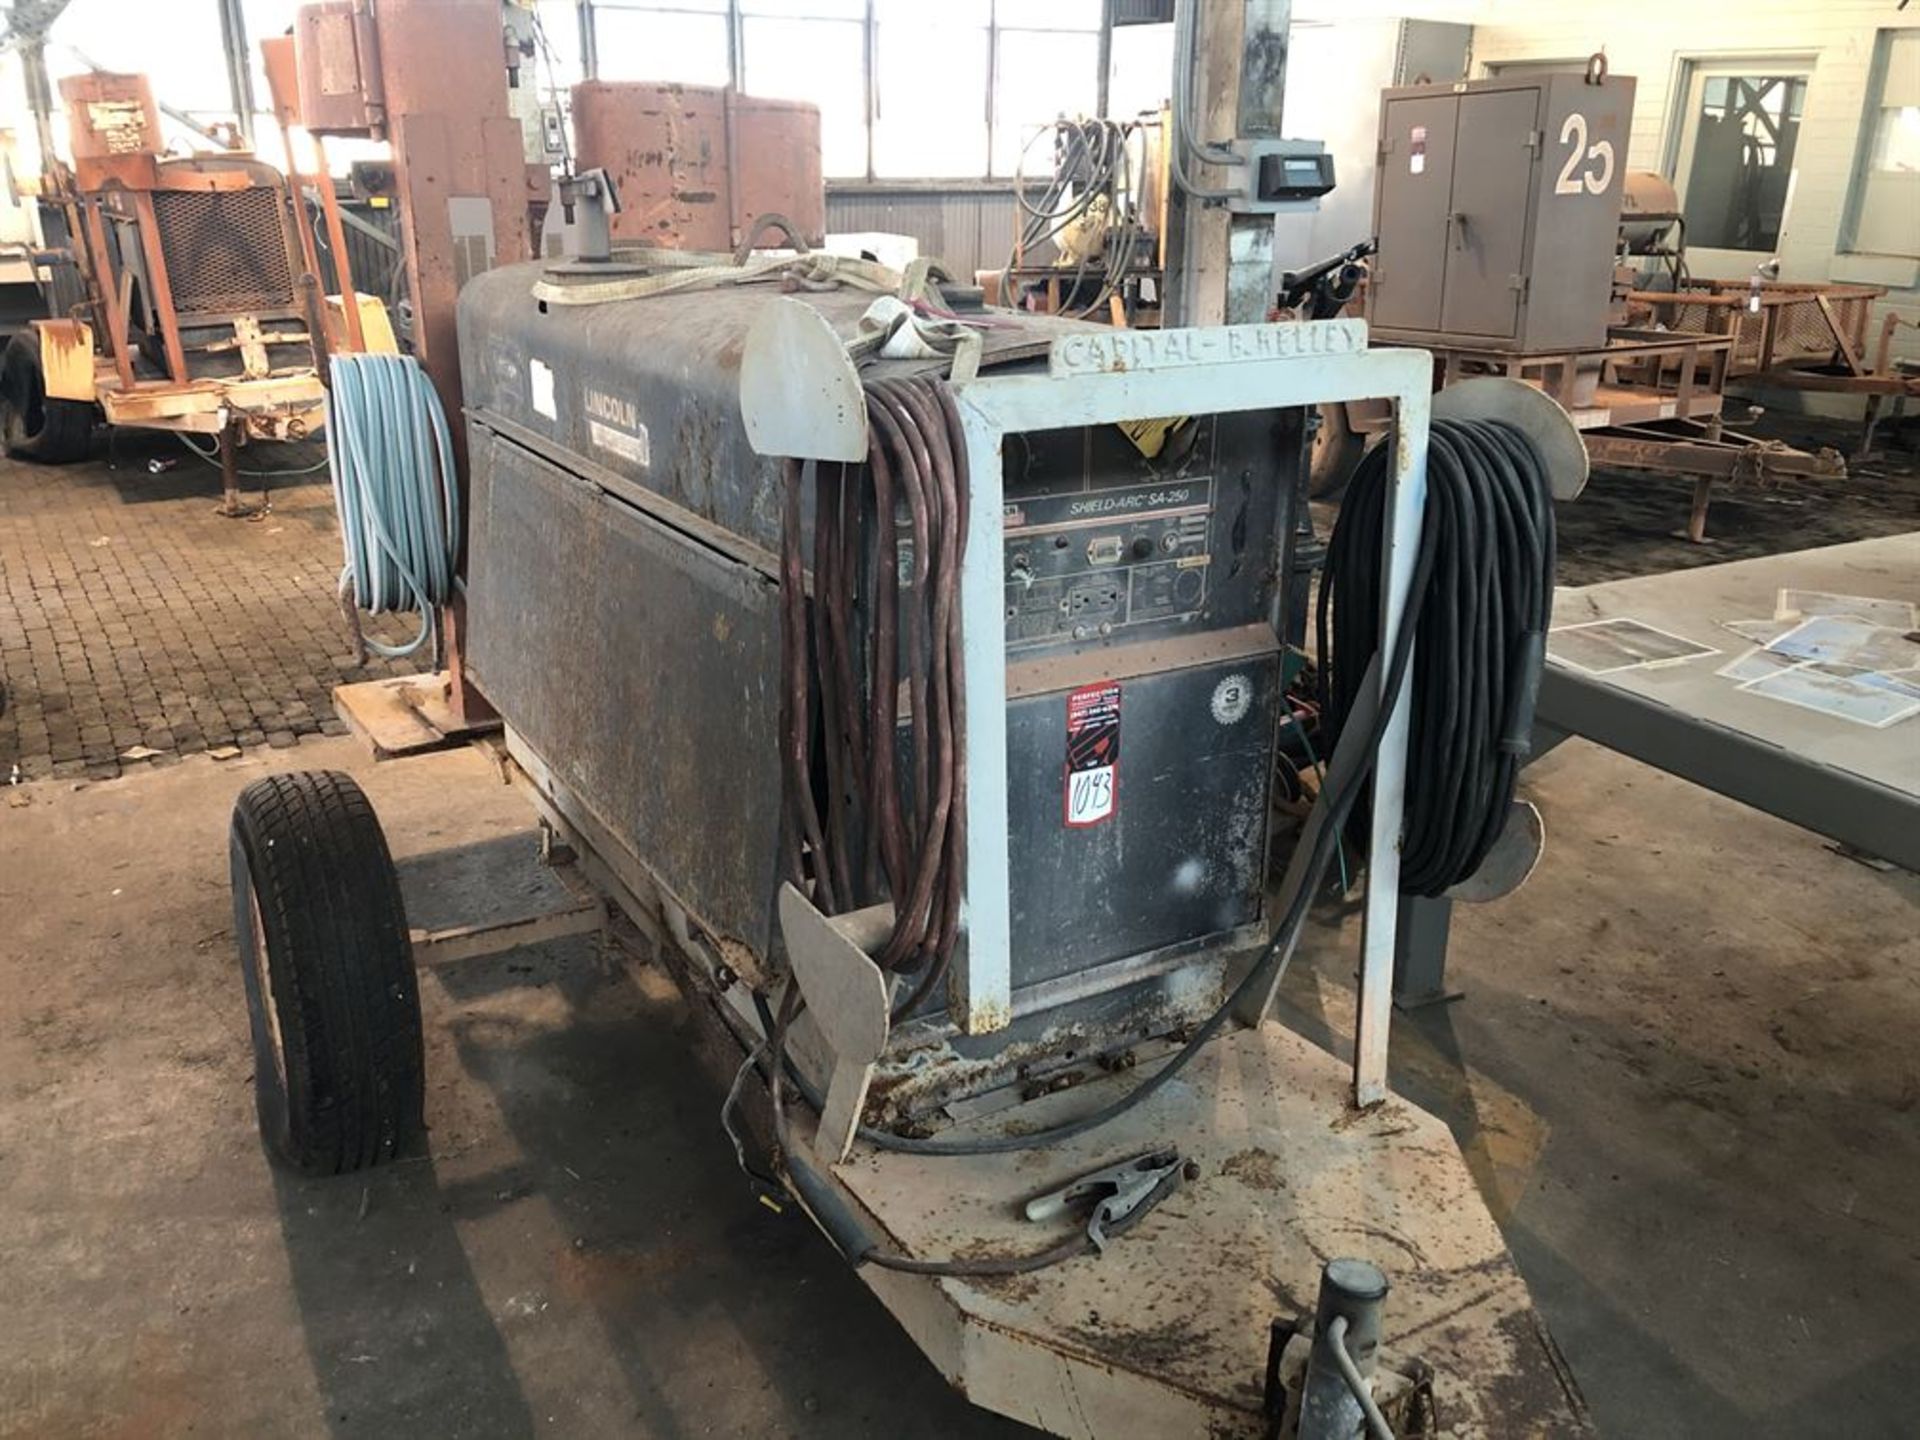 Lot Comprising of Unknown Make Trailer, w/ Lincoln Shield-ARC SA-250 Welding Power Source Generator,